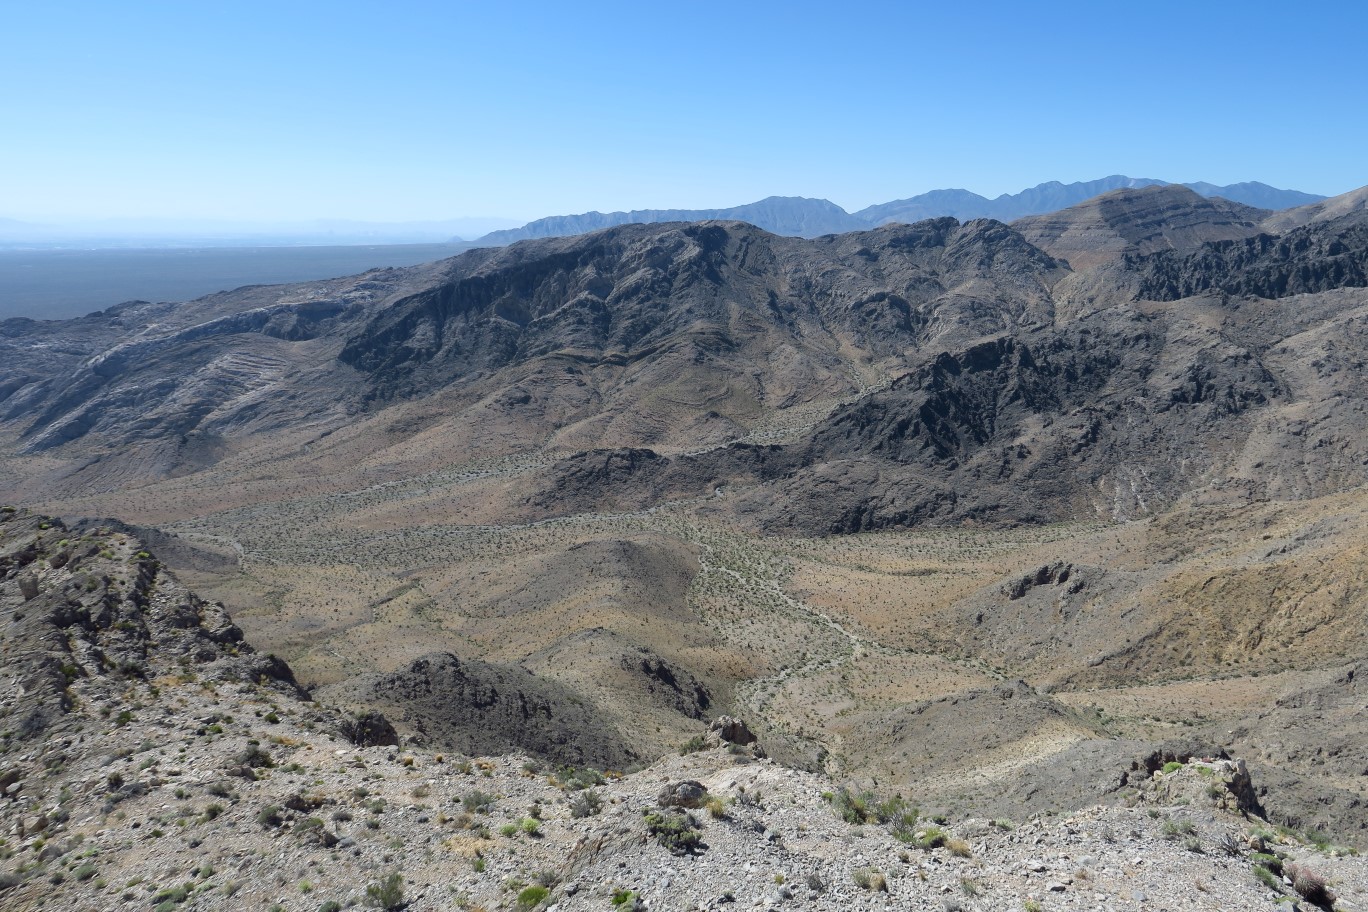 20-scenic_view_from_peak-SSE-Bee_Canyon_Peak,other_unnamed_peak_to_the_right-someday